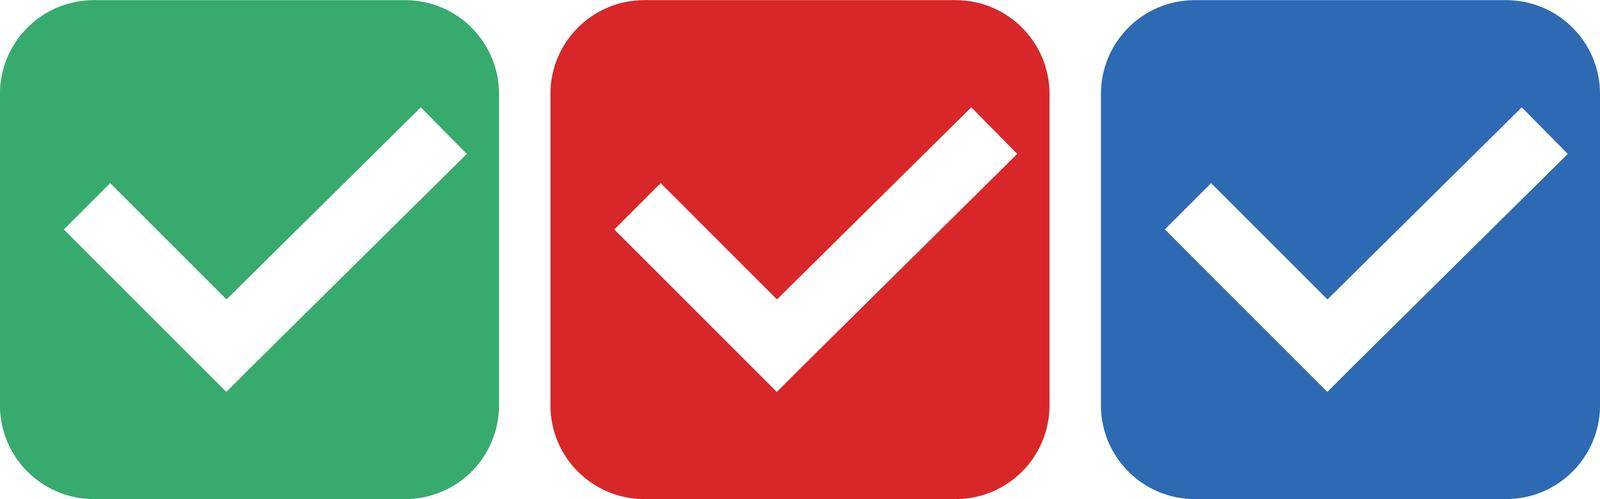 Set of green, red, and blue check mark icons. Vectors to represent permission and confirmation. by illust_monster